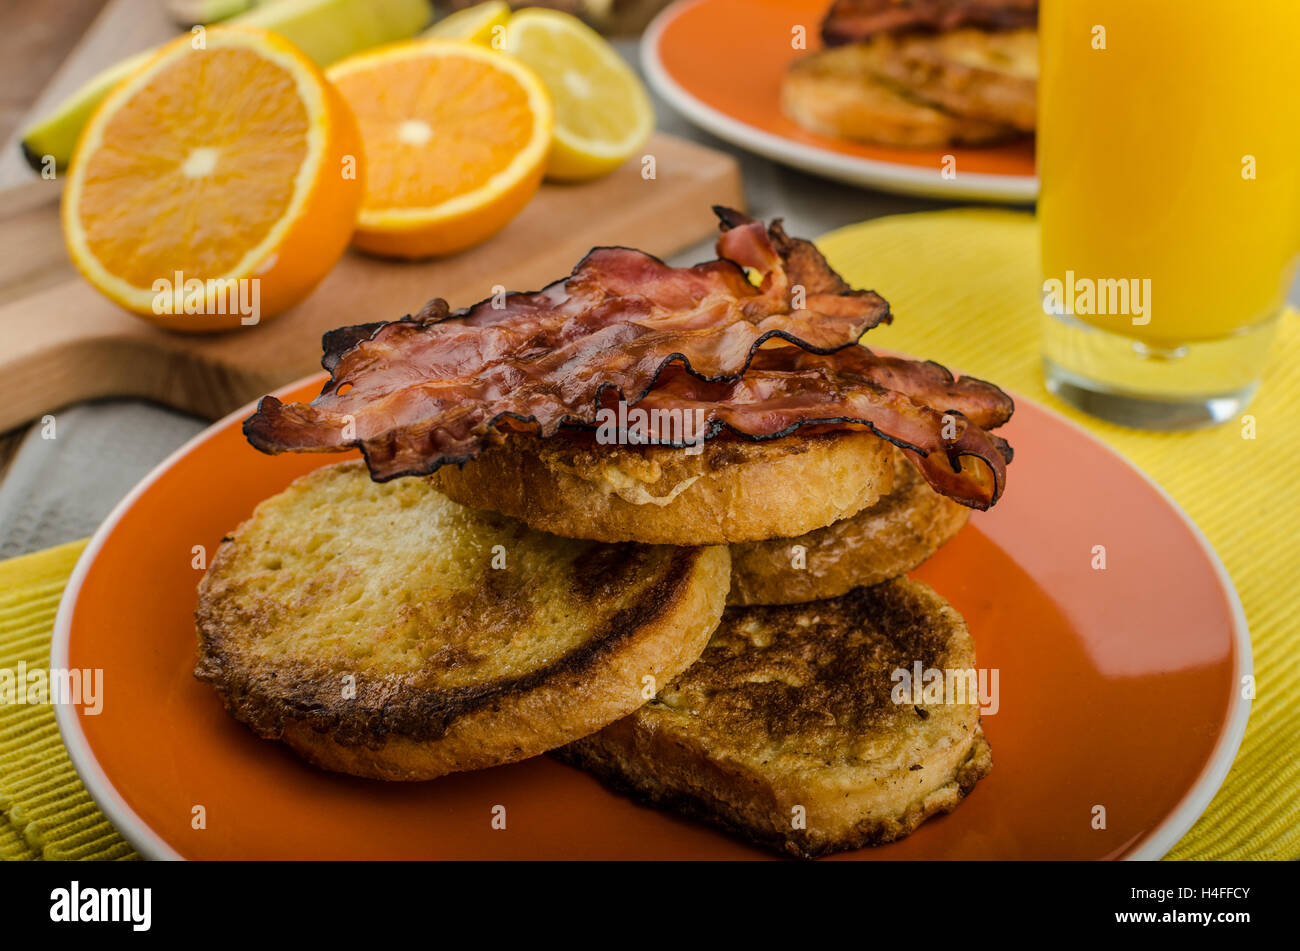 French toast with bacon and fresh juice from oranges Stock Photo